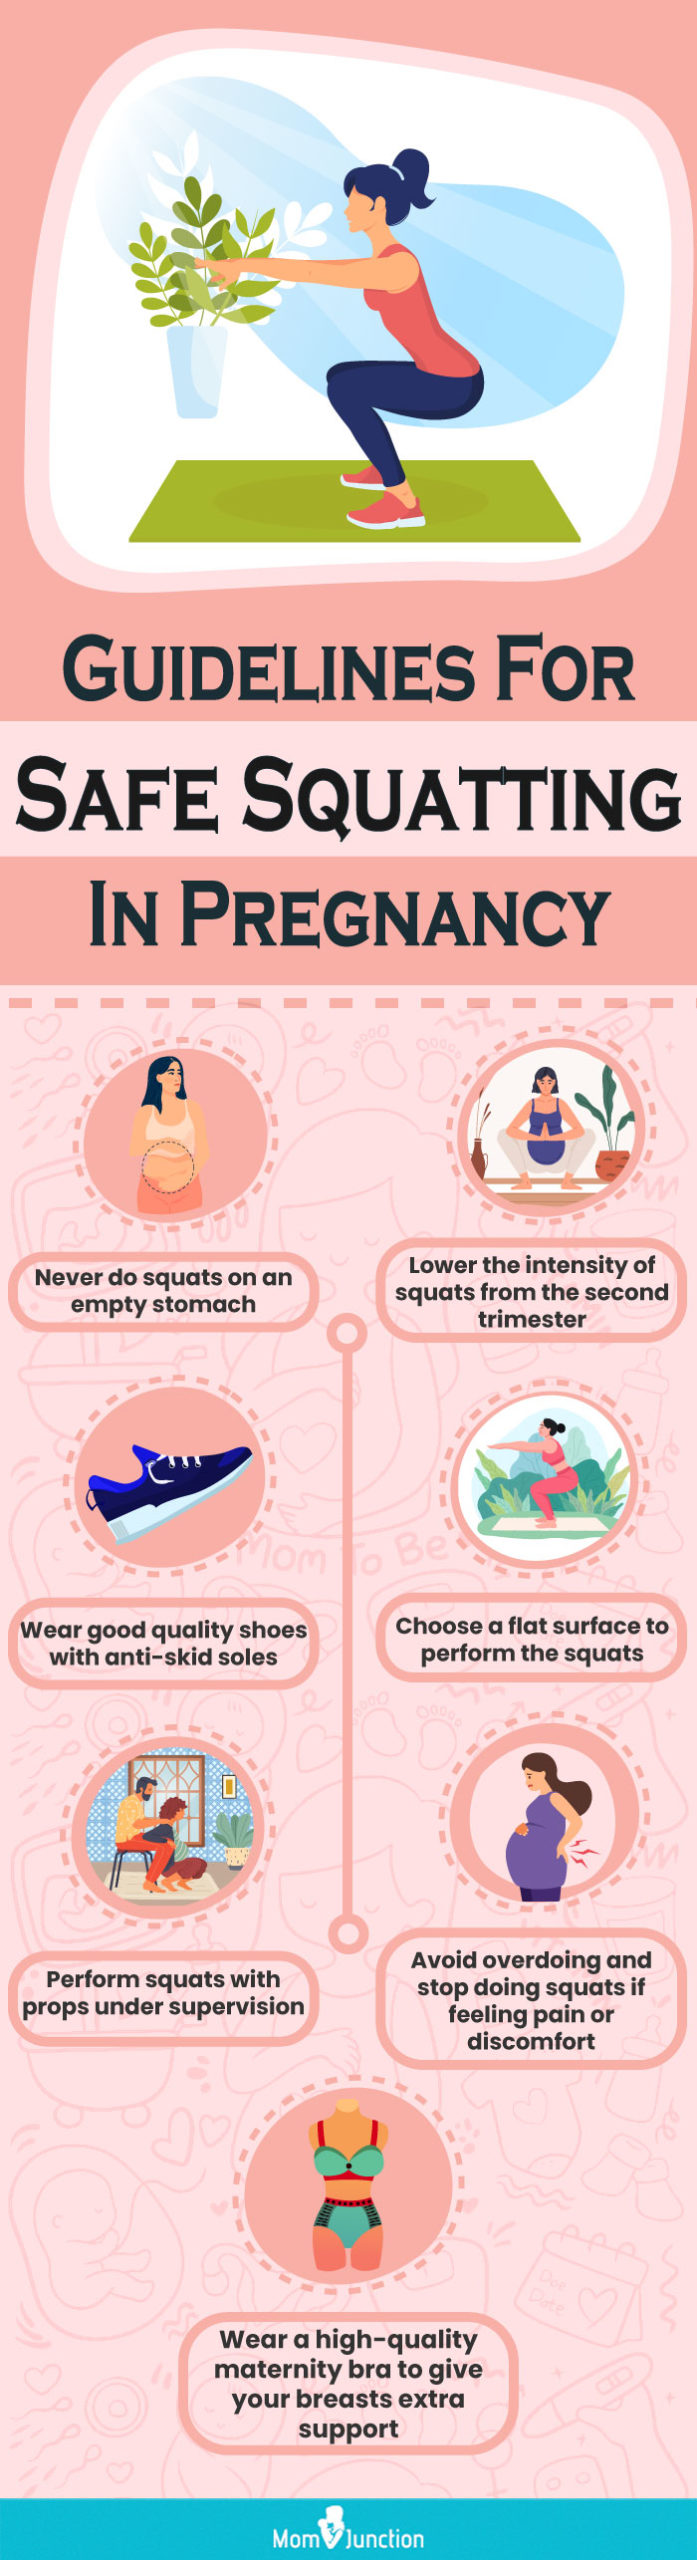 Is it safe to do squats during pregnancy? - Zyla Health